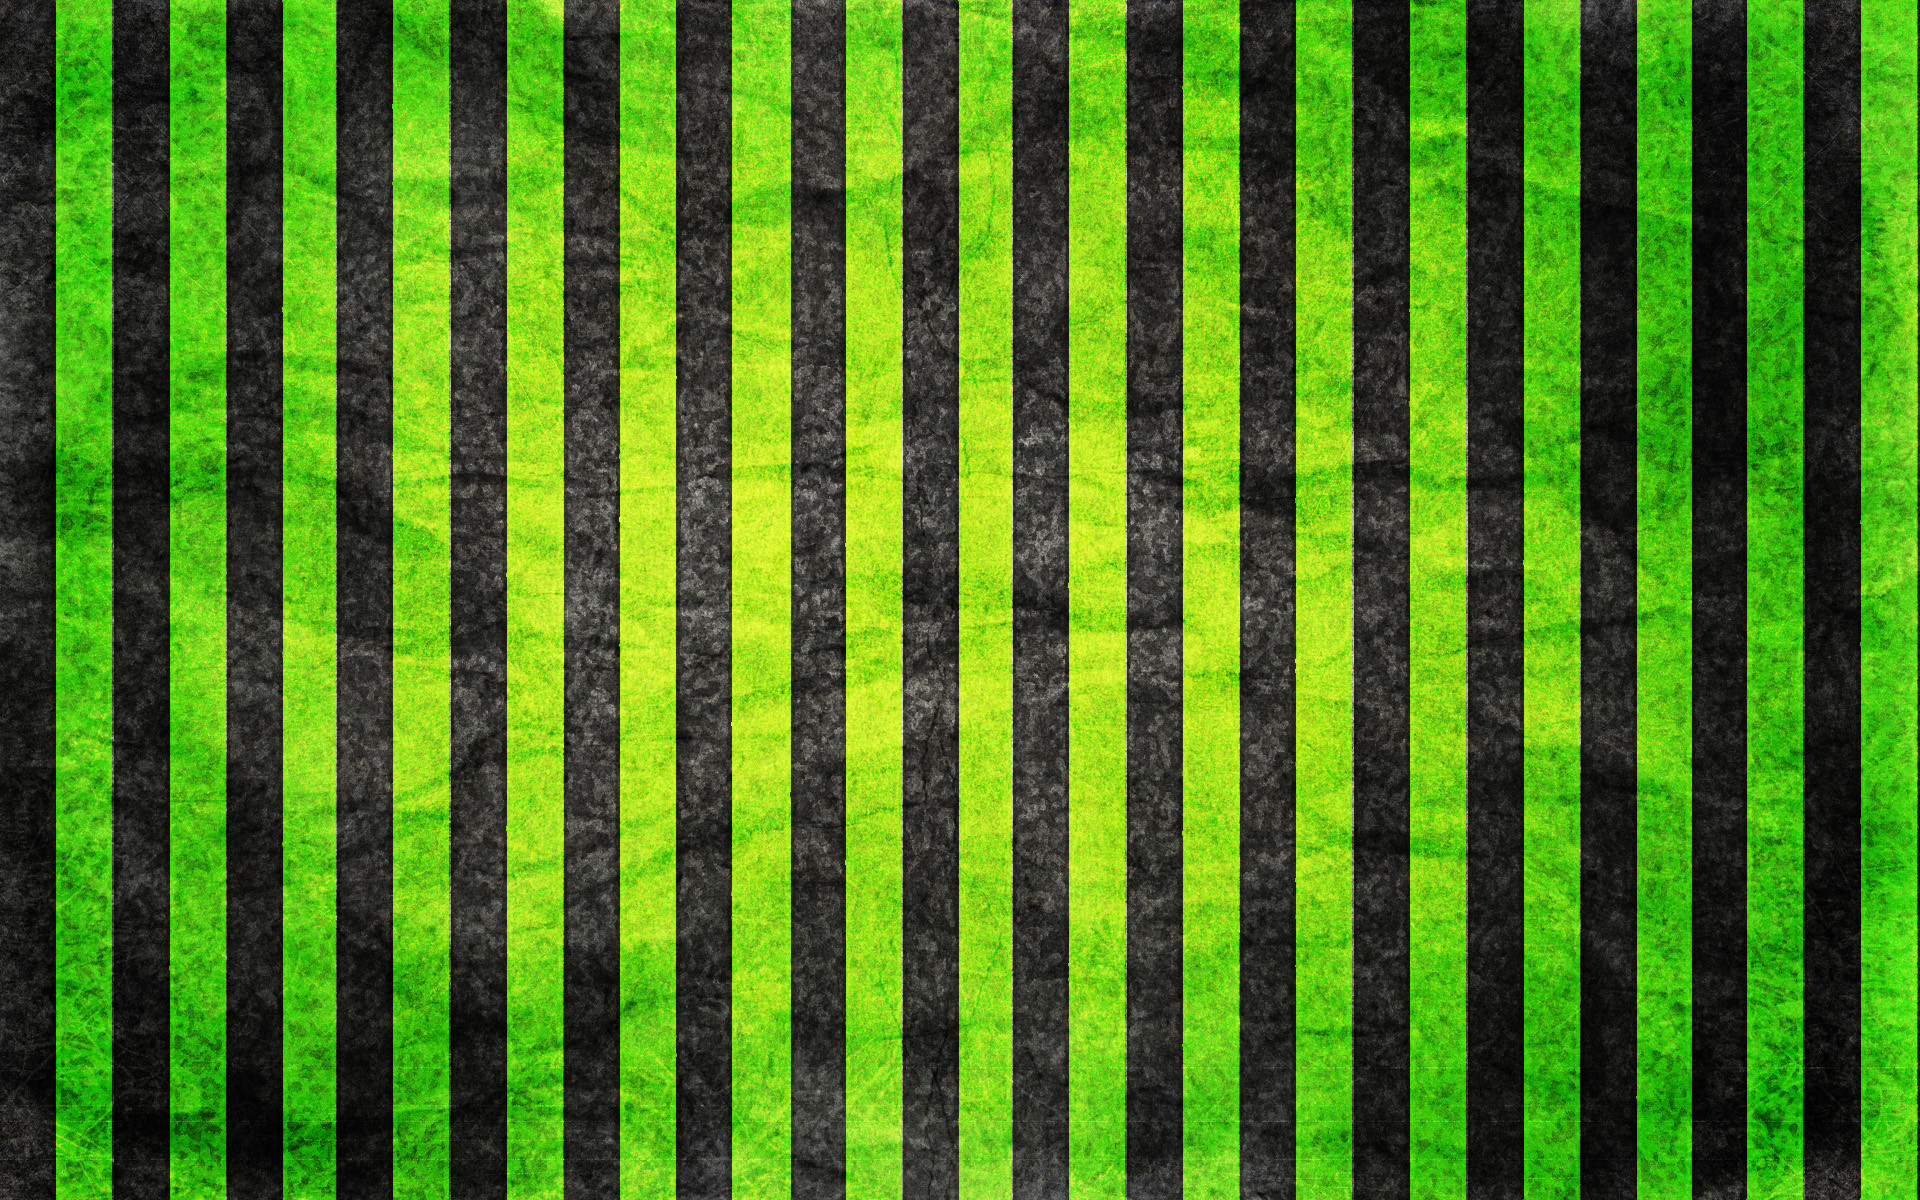 1920x1200 Download Lime Green And Black Striped Wallpaper Gallery